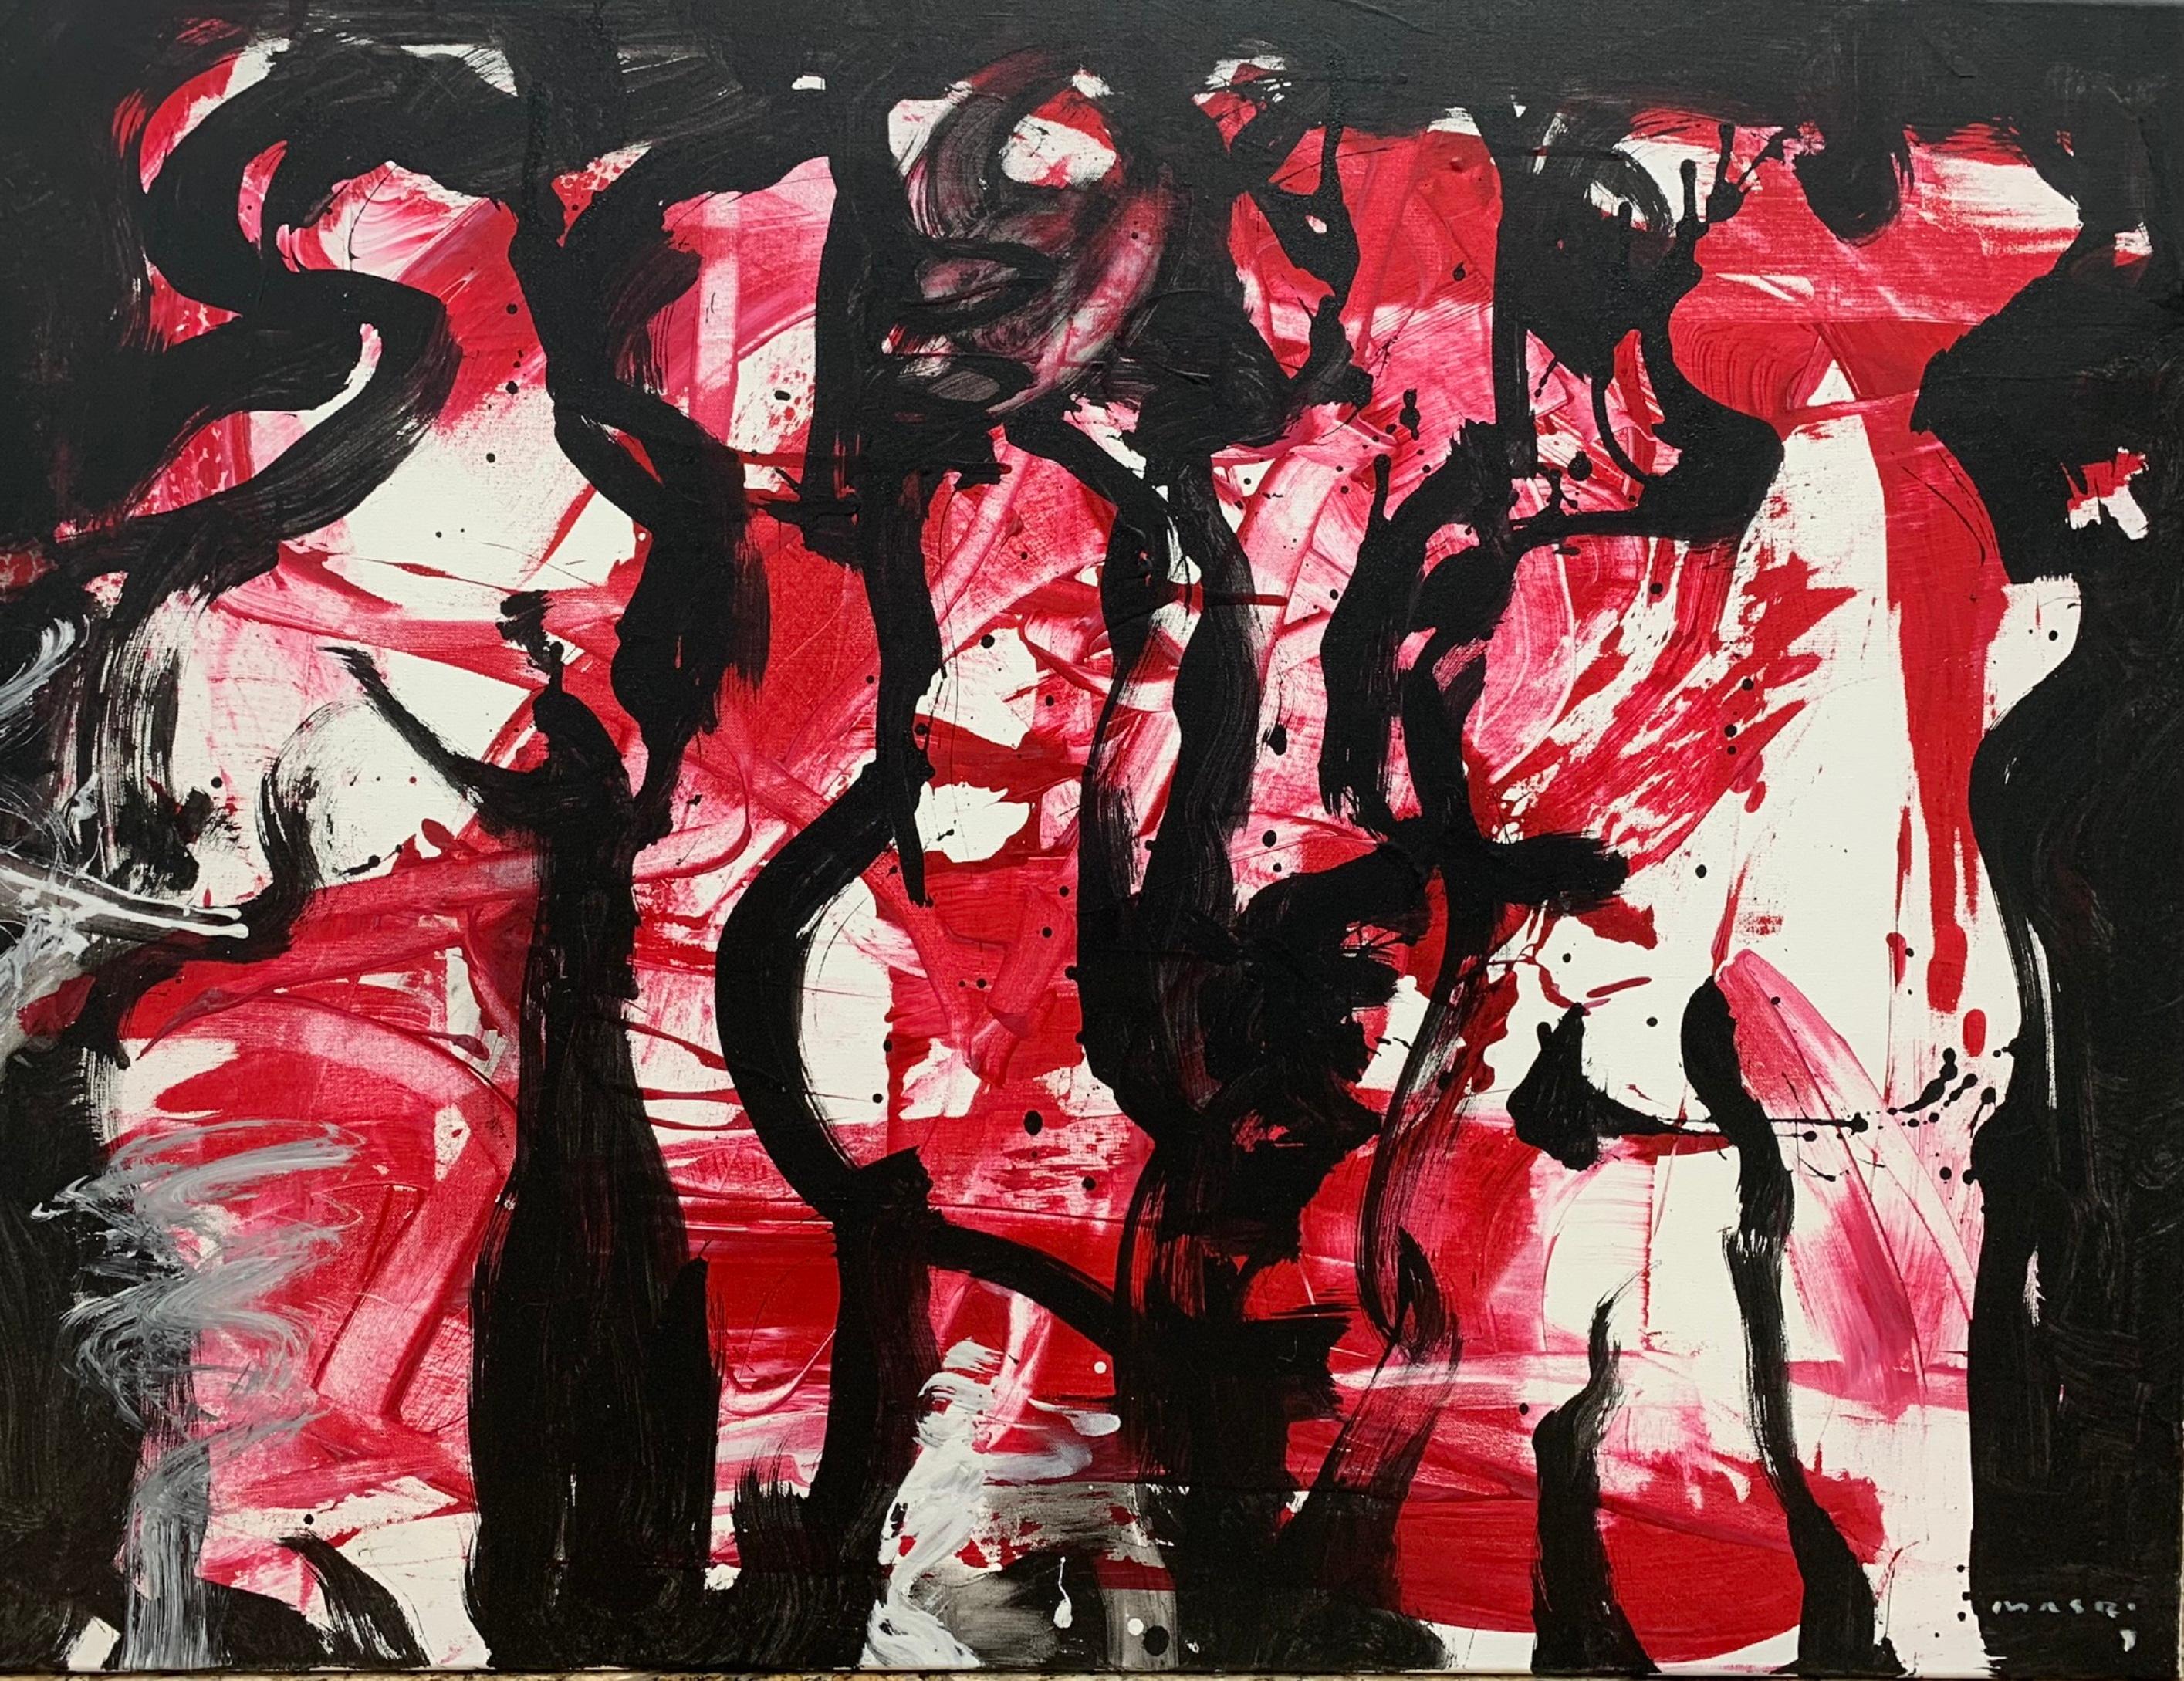 Masri Hayssam Abstract Painting - "Between B&W" Red & Black Mixed-Media Contemporary Abstract Expressionist Masri